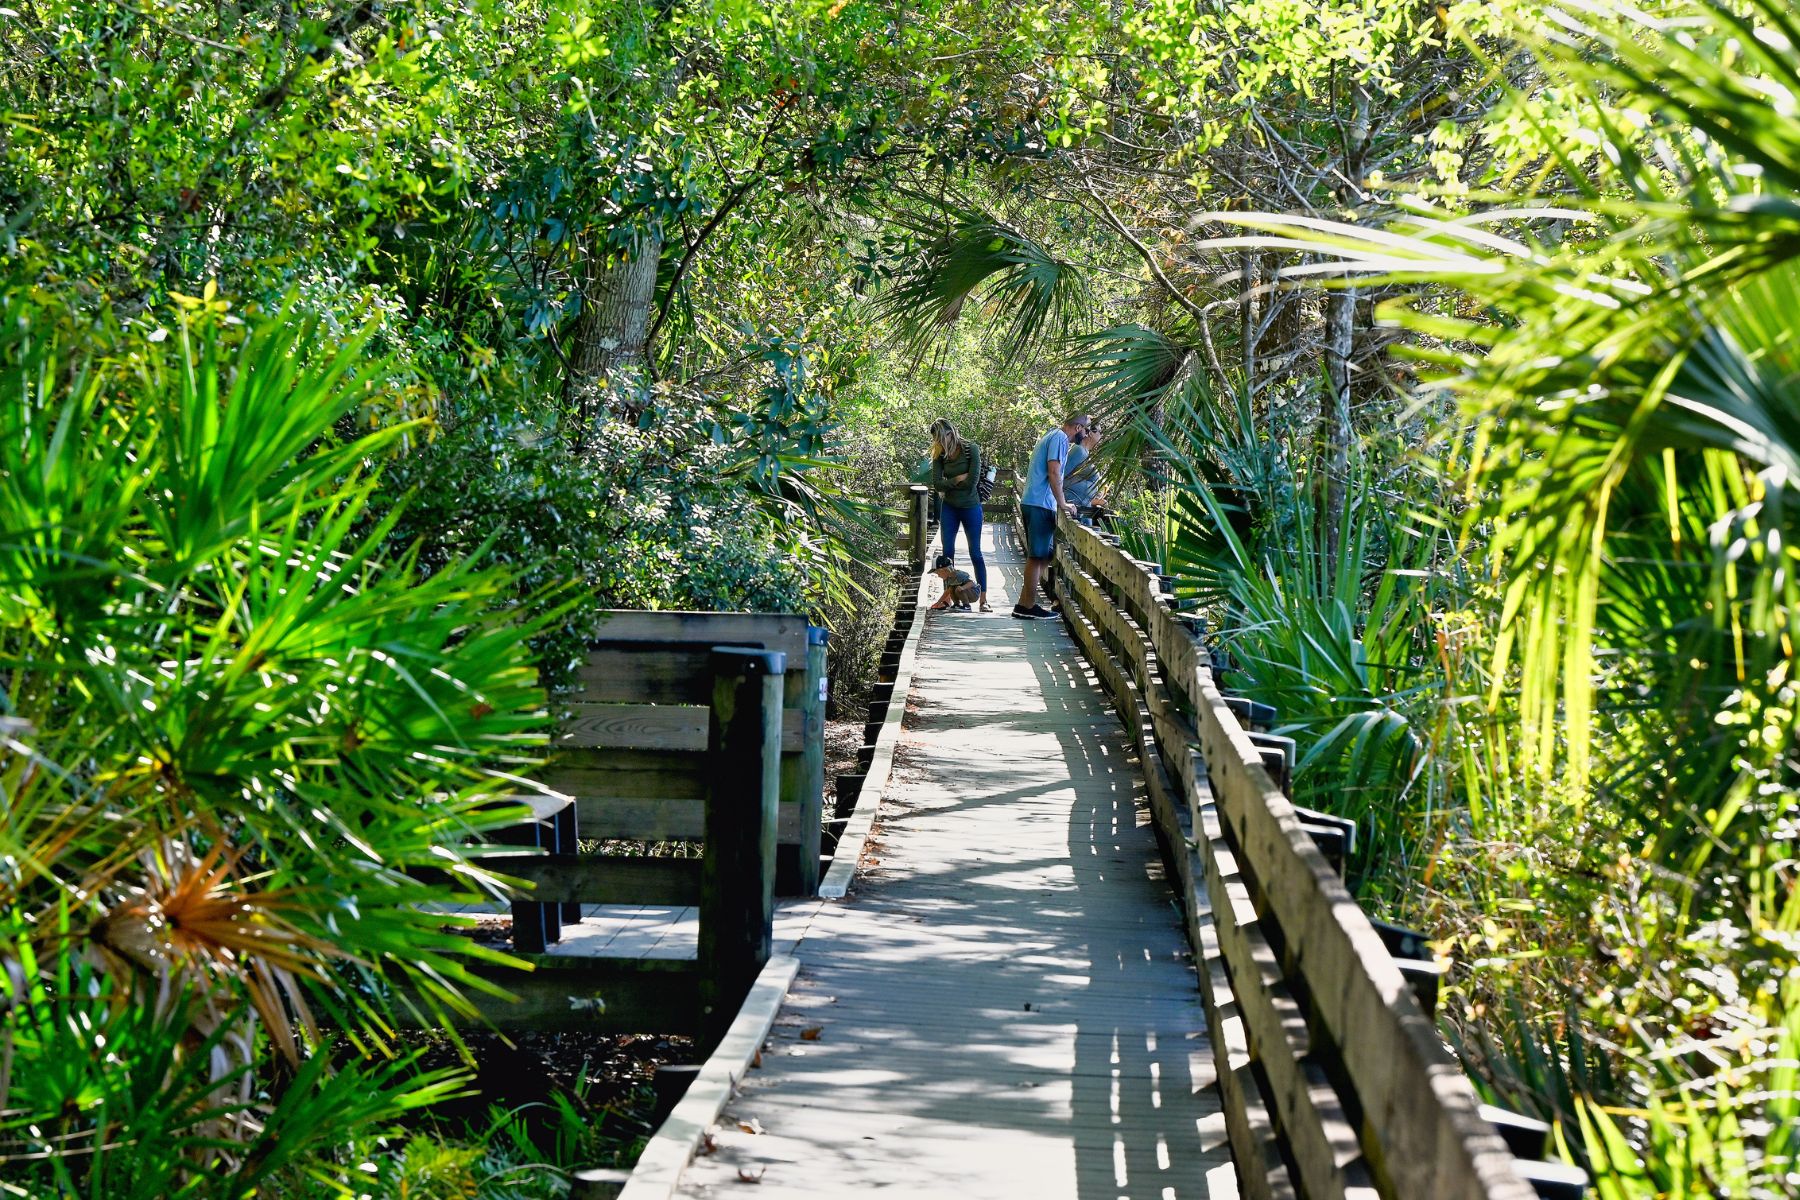 A boardwalk at the Six Mile Cypress Slough Preserve in Fort Myers, Florida